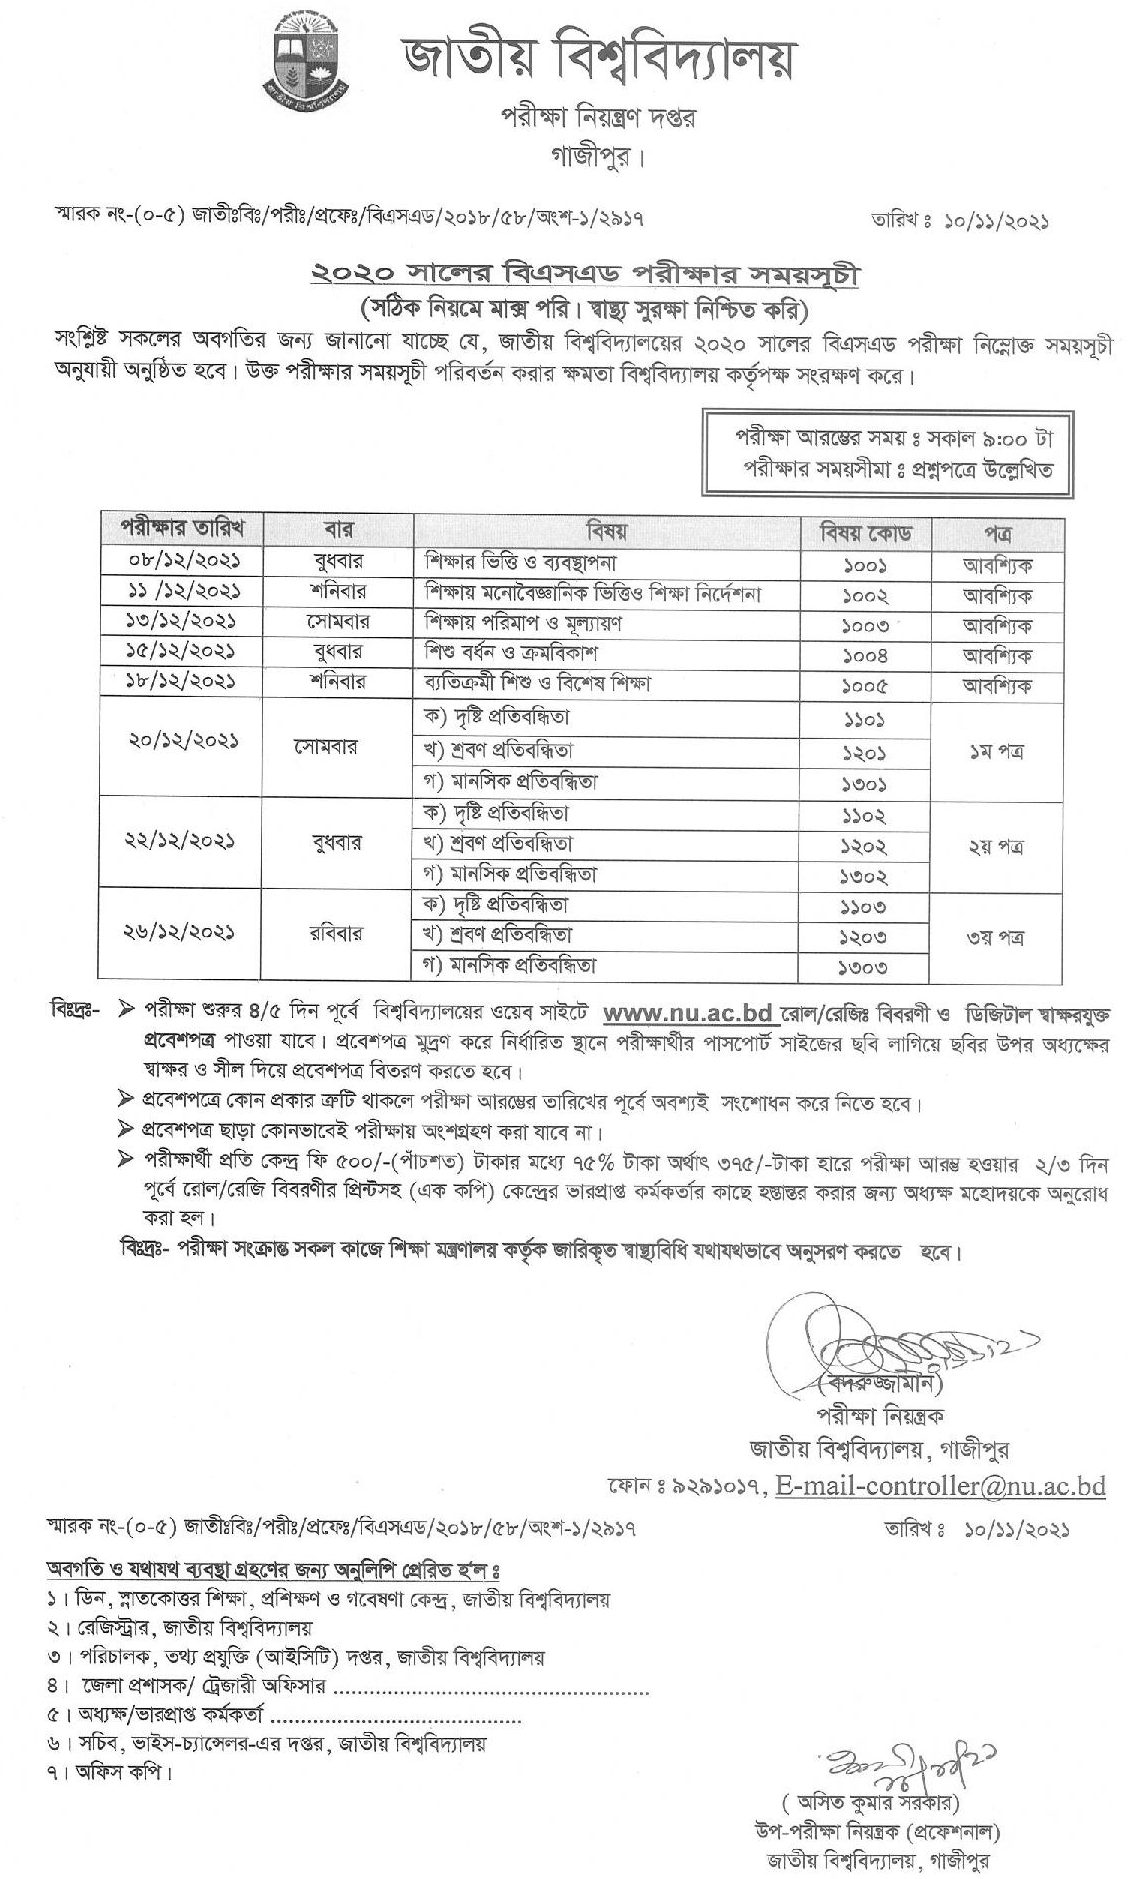 NU Bachelor of Science In Education (B.S.Ed.) Exam Routine 2021